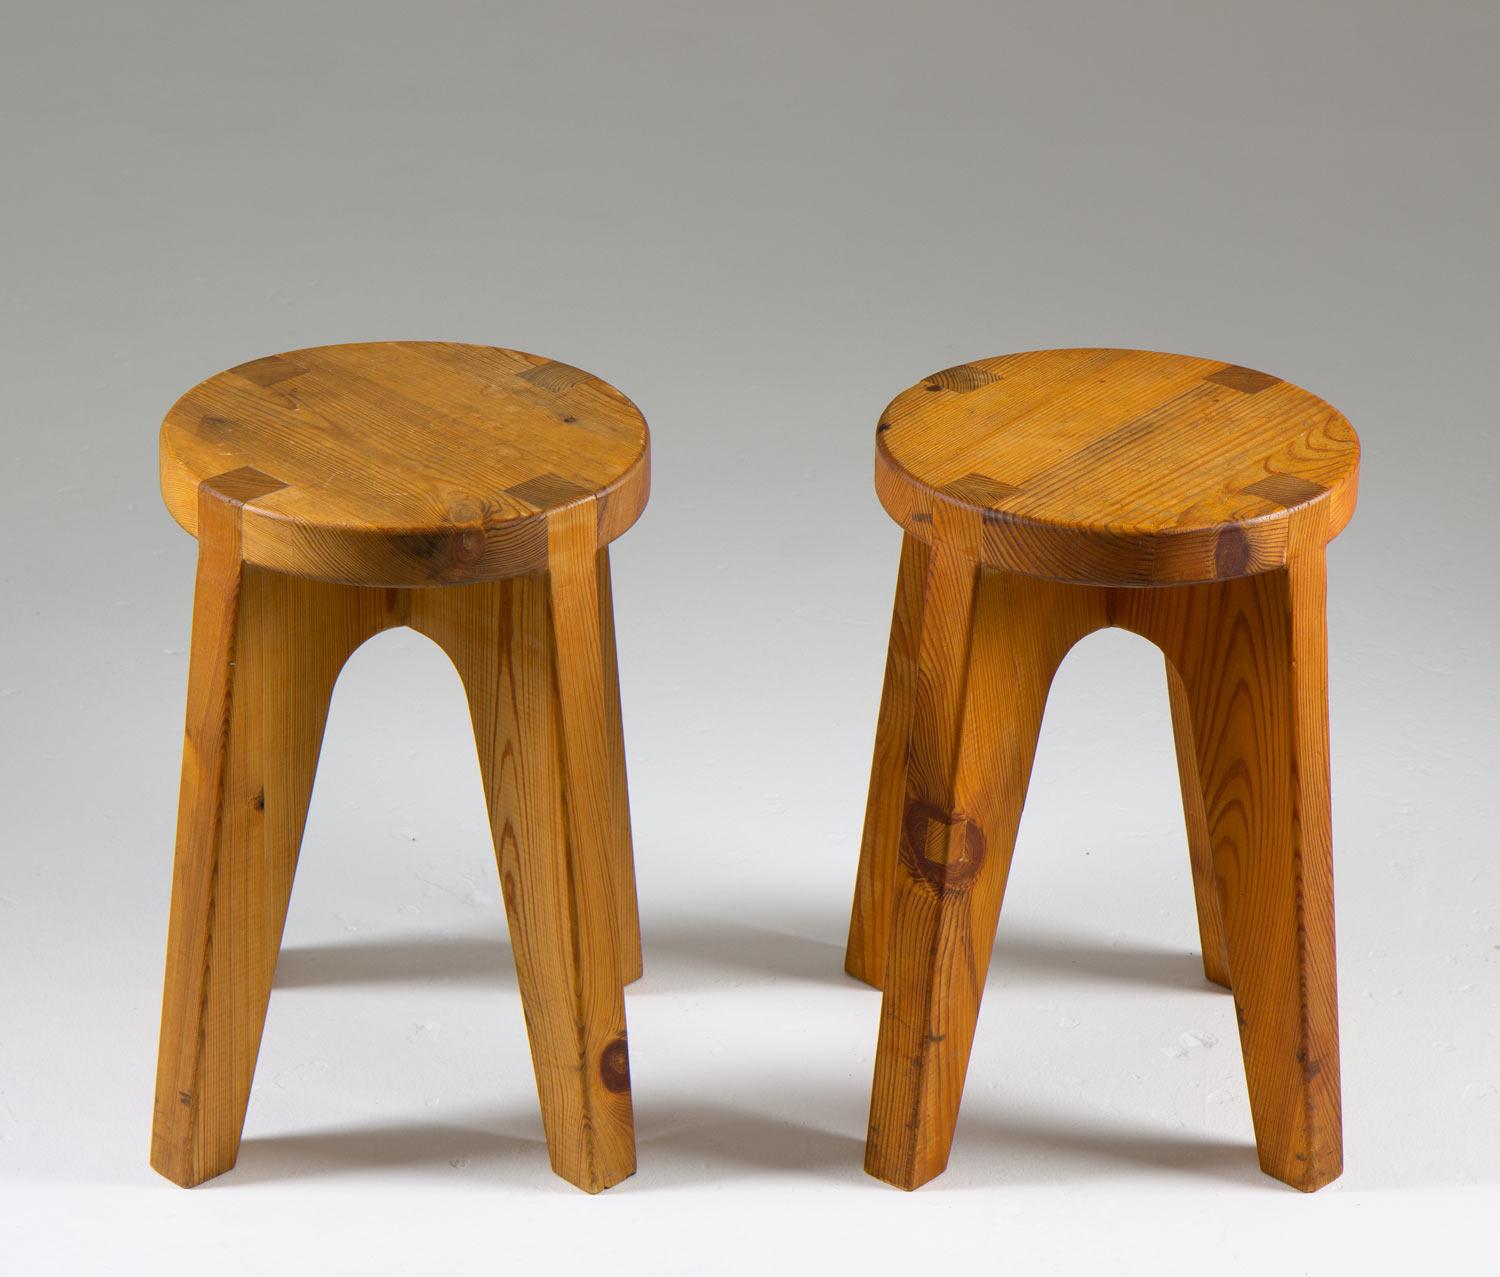 Rare stools manufactured in Sweden, ca 1970. 
Extremely well made stools that consist of a round seat with four legs that are beautifully connected with visible joinery.

Condition: Very good original condition with beautiful patina.